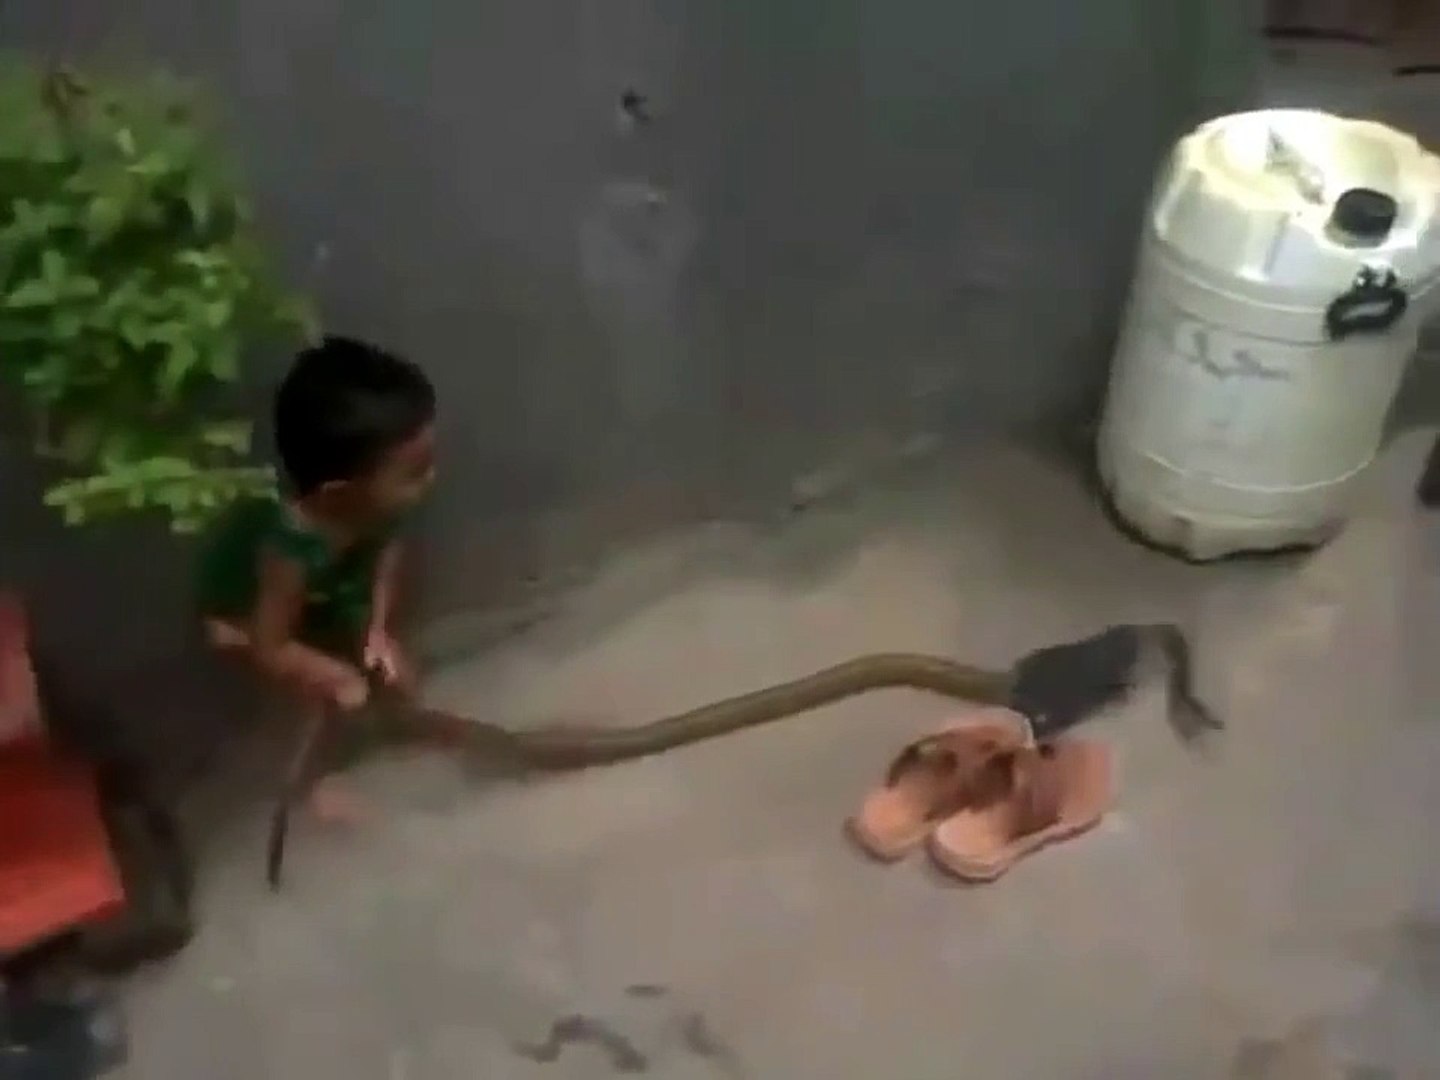 Brave Kid playing with snake